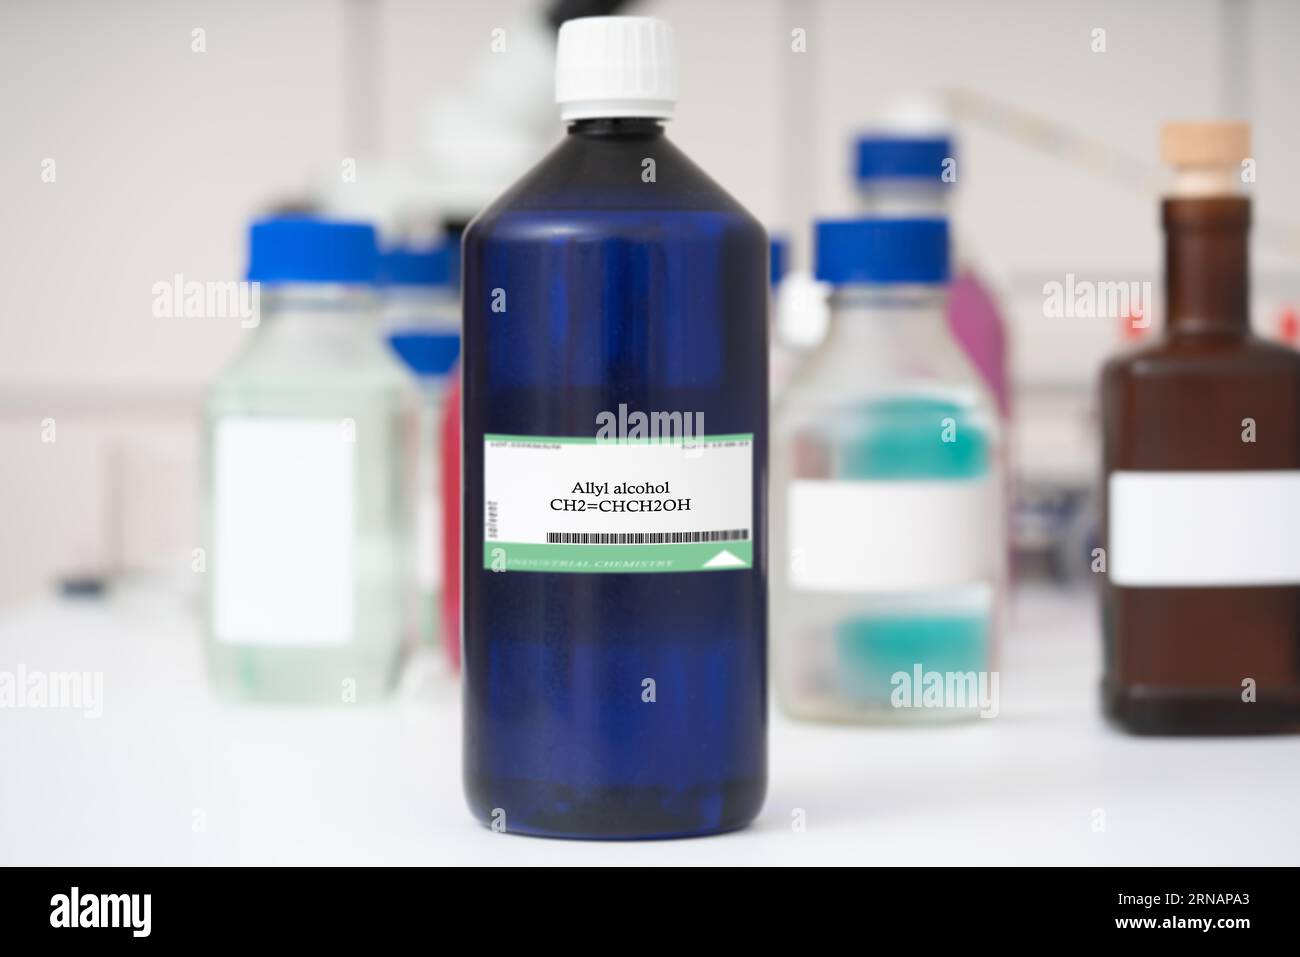 Allyl alcohol A colorless, flammable liquid used as a solvent and in the production of various chemicals, such as resins and plastics. Stock Photo